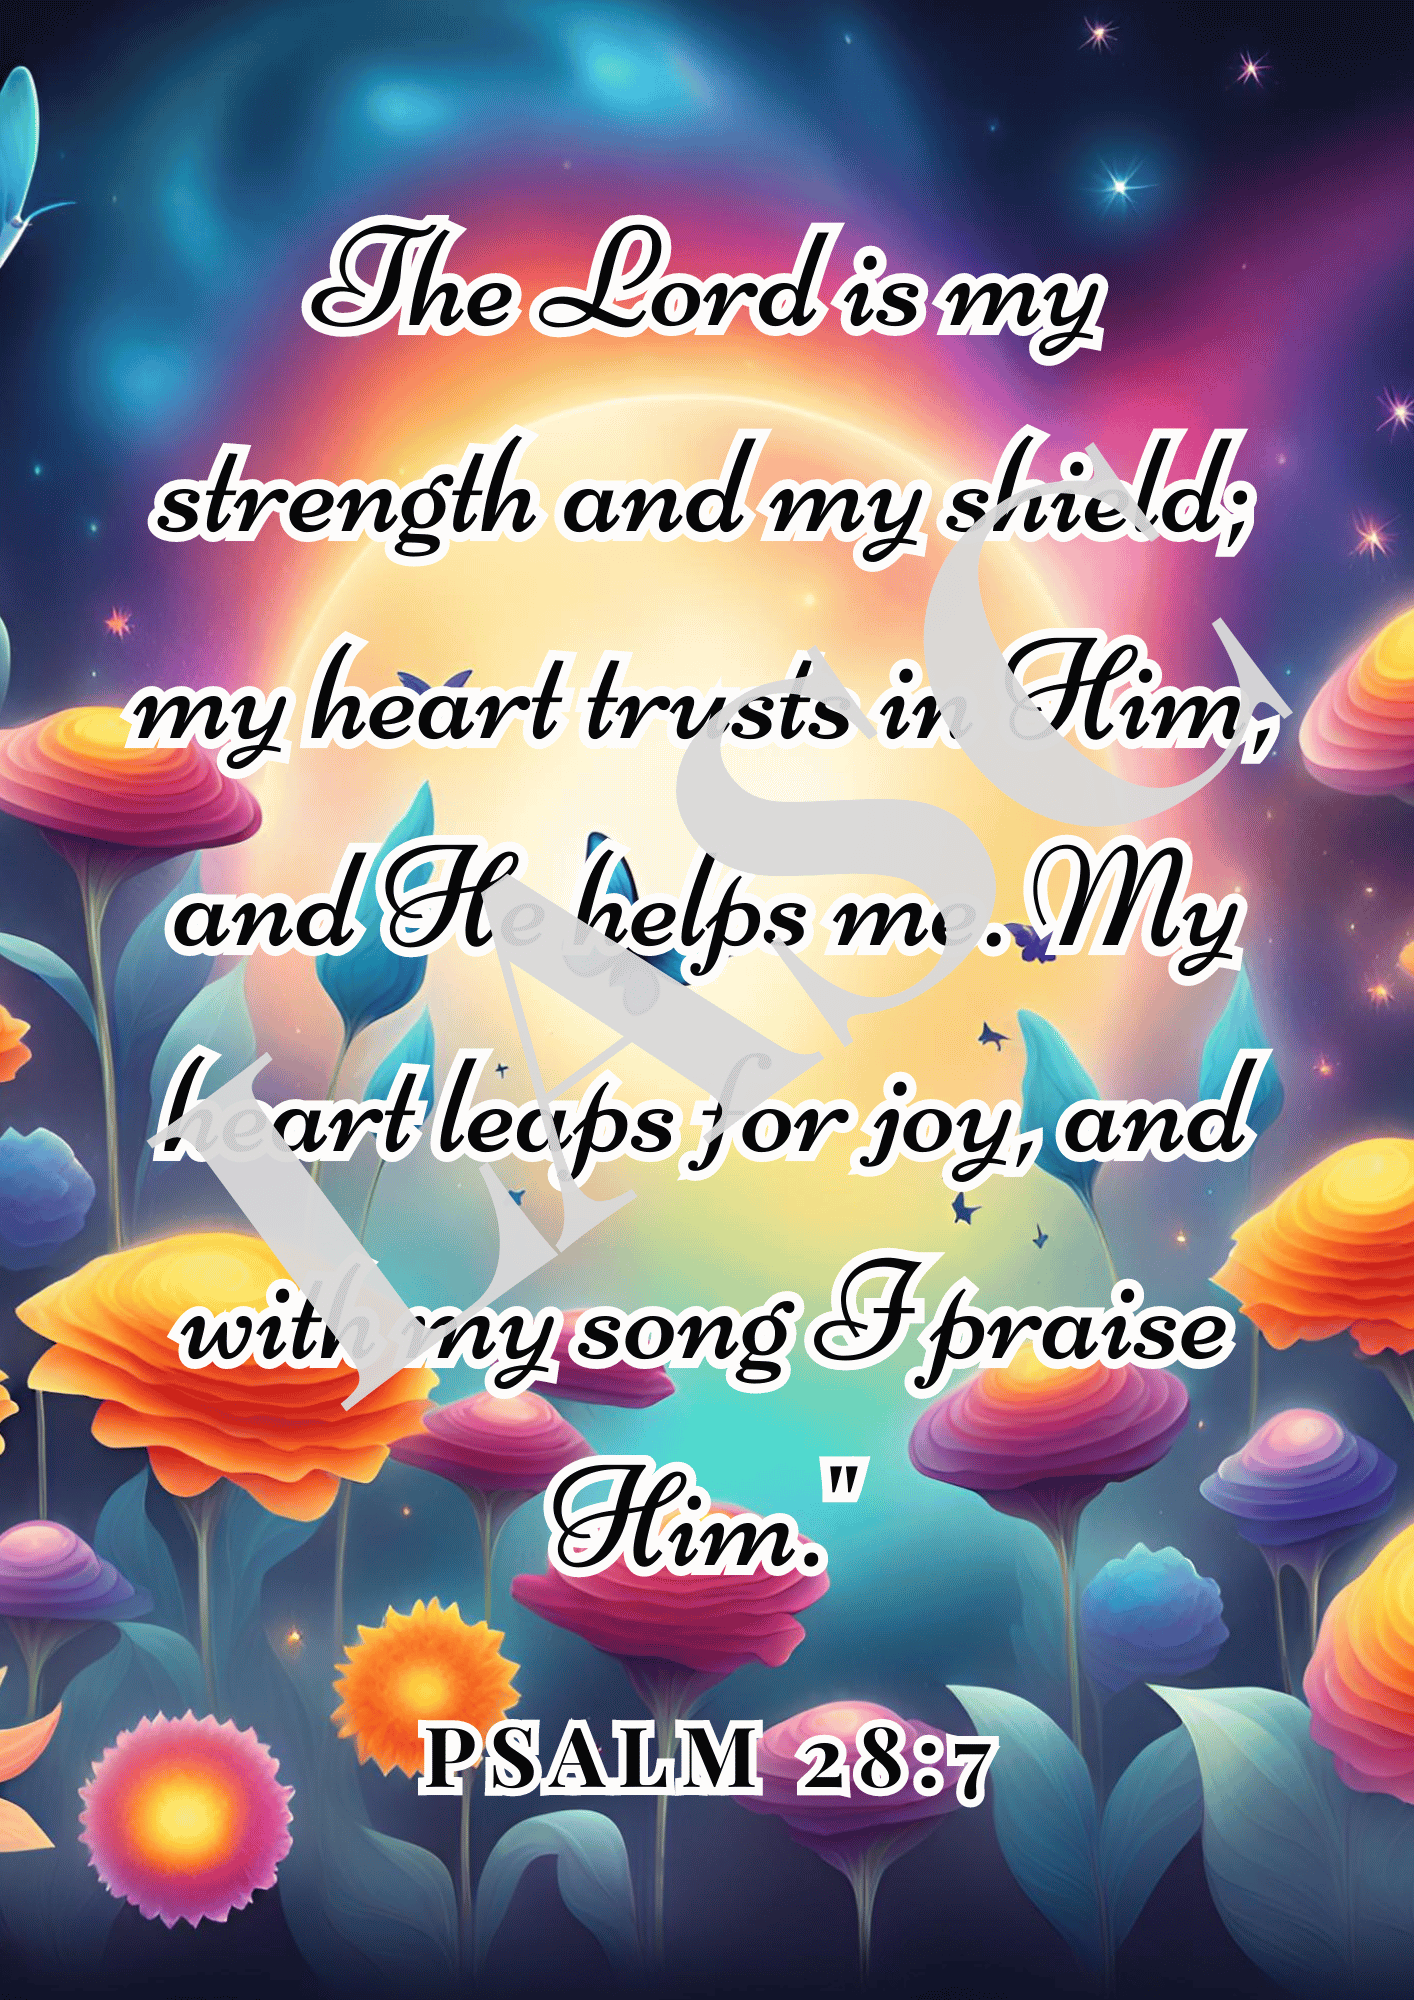 Digital Art, The Lord is my strength, Quotes and Verses, Free download